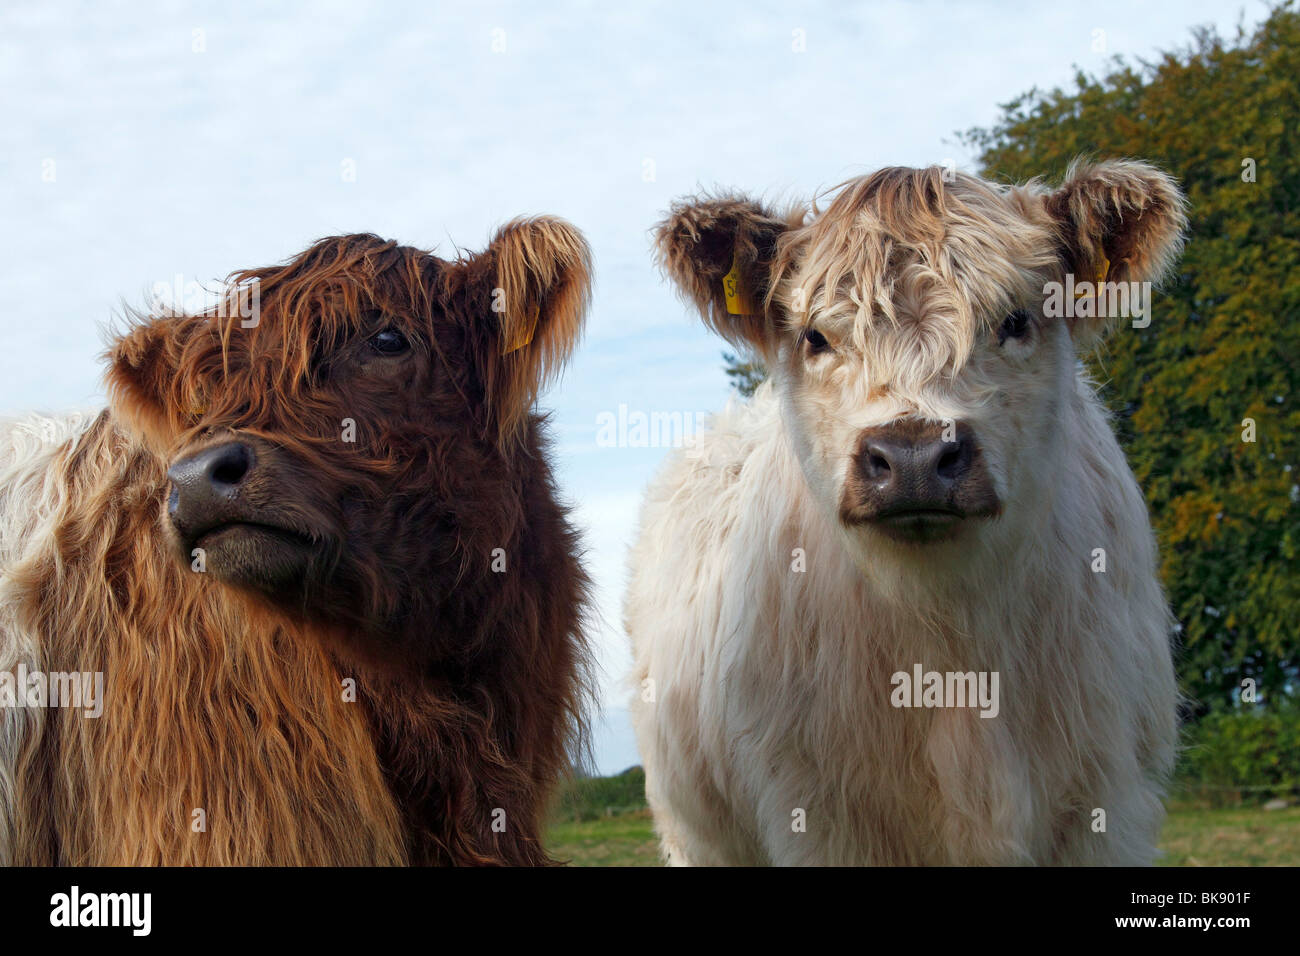 Two young Galloway cattles (Bos primigenius f. taurus) Stock Photo